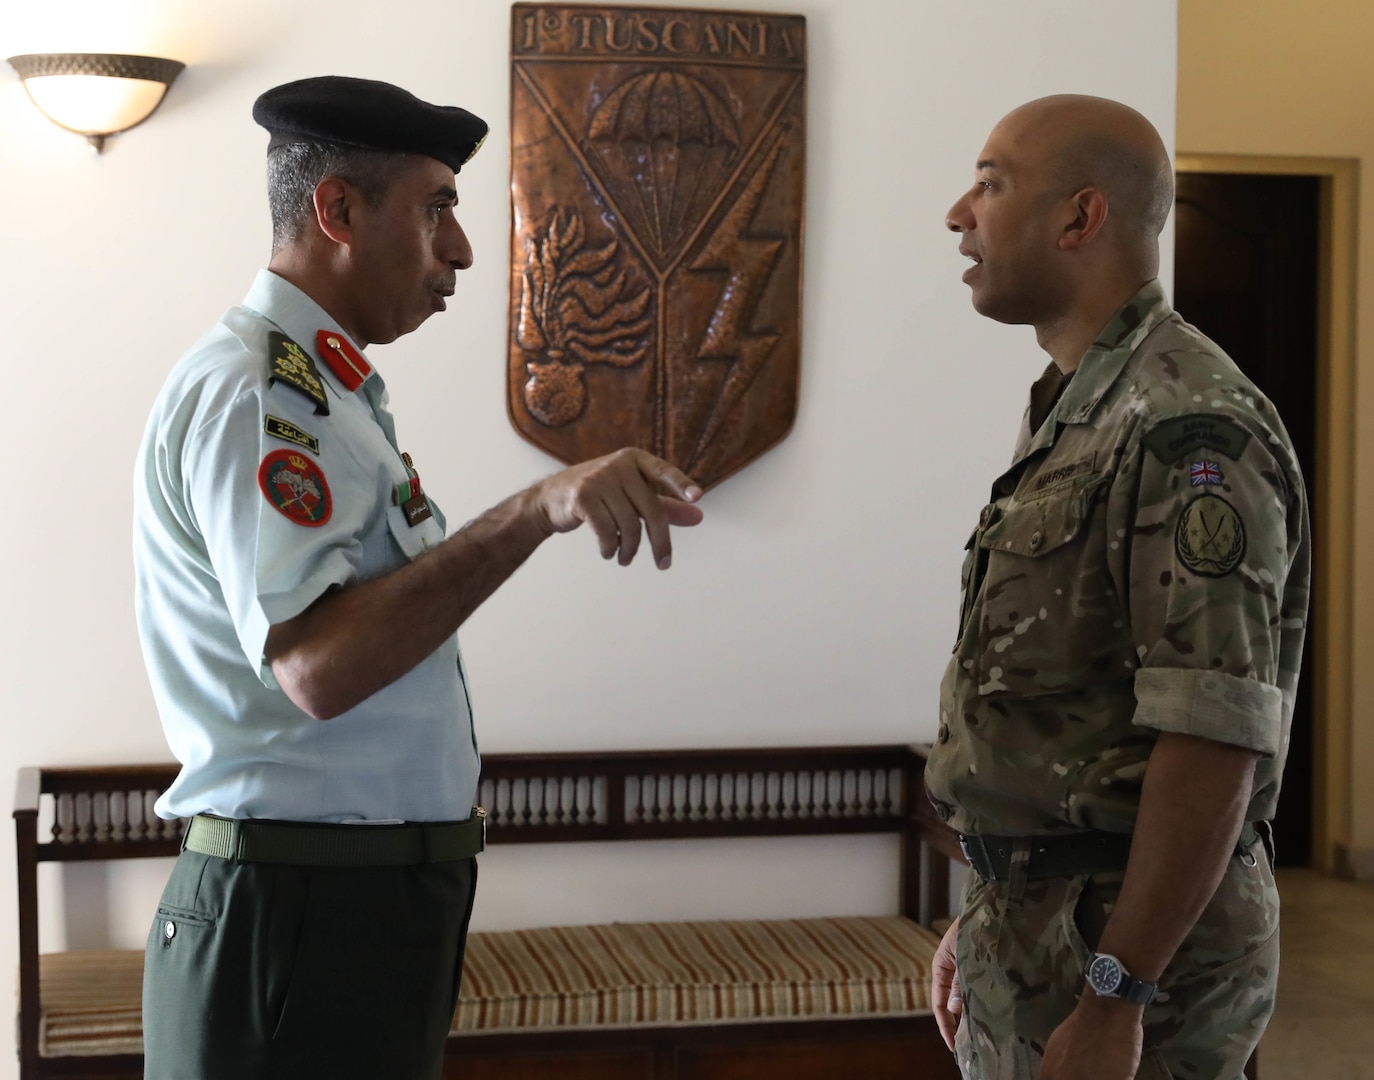 Jordanian Brig. Gen. Raed Saod Al-jbour, left, and British Army Brig. Karl Harris (right) talk before a defense attaché forum July 19, 2022, in Baghdad, Iraq. The defense attaché forum brought together defense attachés from several Global Coalition countries as well as representatives from Combined Joint Task Force - Operation Inherent Resolve (CJTF-OIR) and interagency partners to discuss topics including the need for increased repatriation and reintegration of displaced persons from northeast Syria to reduce ISIS influence in those vulnerable populations; the threat of ISIS members in detention centers operated by Syrian Democratic Forces in northeast Syria; and the need for greater international action to address these ongoing security and humanitarian challenges. Al-Jbour is the Defense Attaché from Jordan. Harris is the deputy commanding general of CJTF-OIR. (U.S. Army photo by Sgt. Brian Reed)